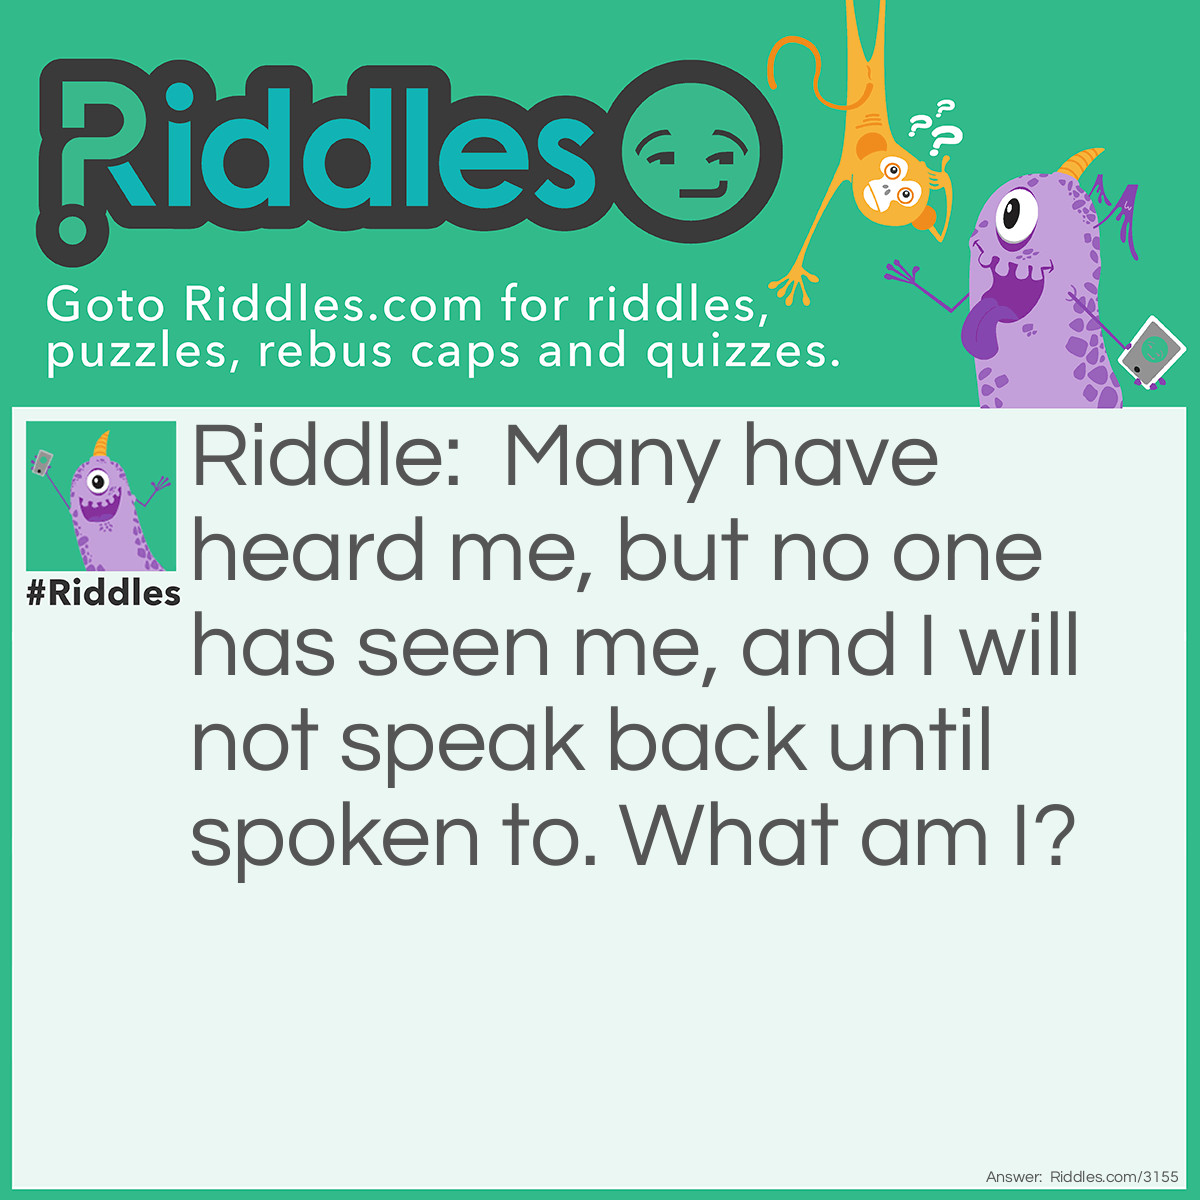 Riddle: Many have heard me, but no one has seen me, and I will not speak back until spoken to. What am I? Answer: An echo.